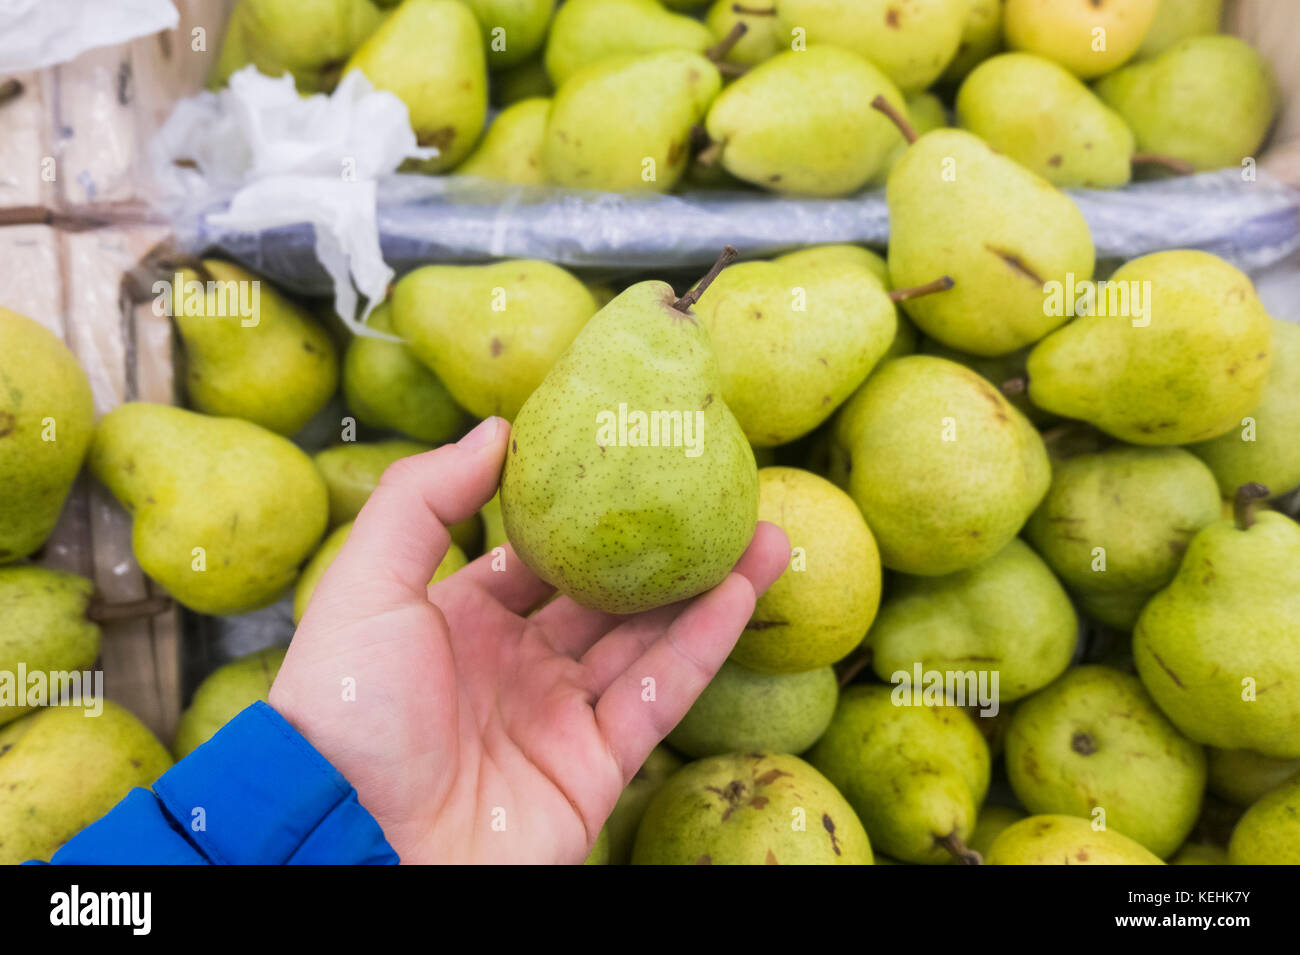 Hand holding green pear Stock Photo